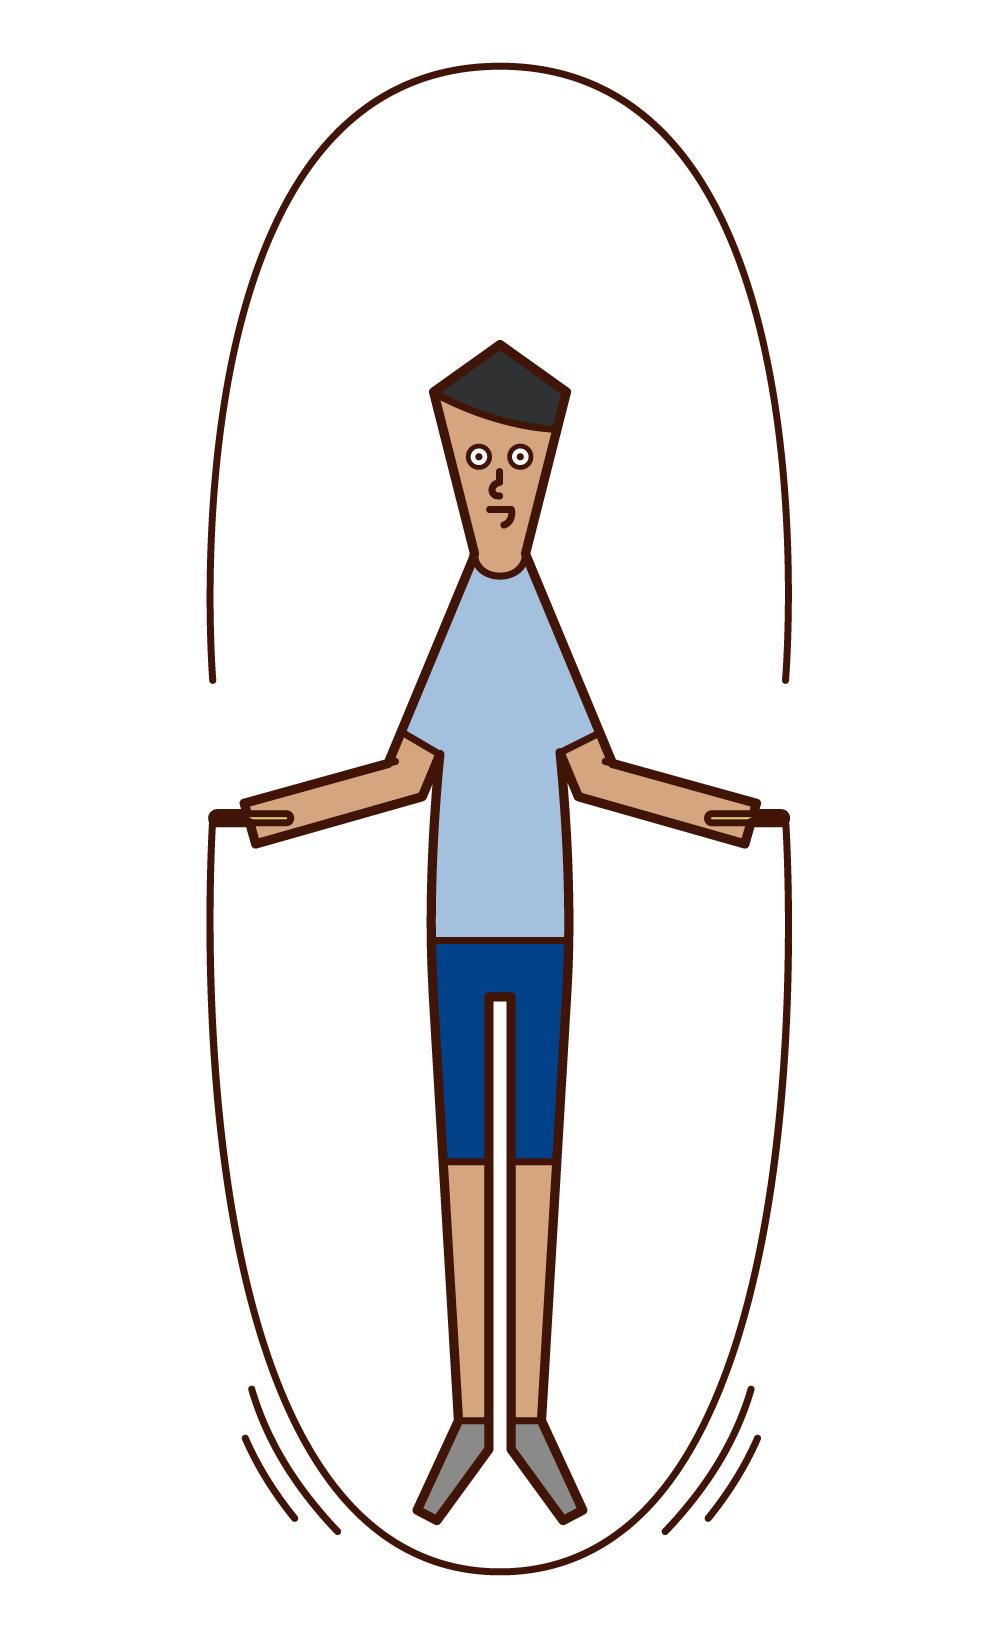 Illustration of a man jumping rope